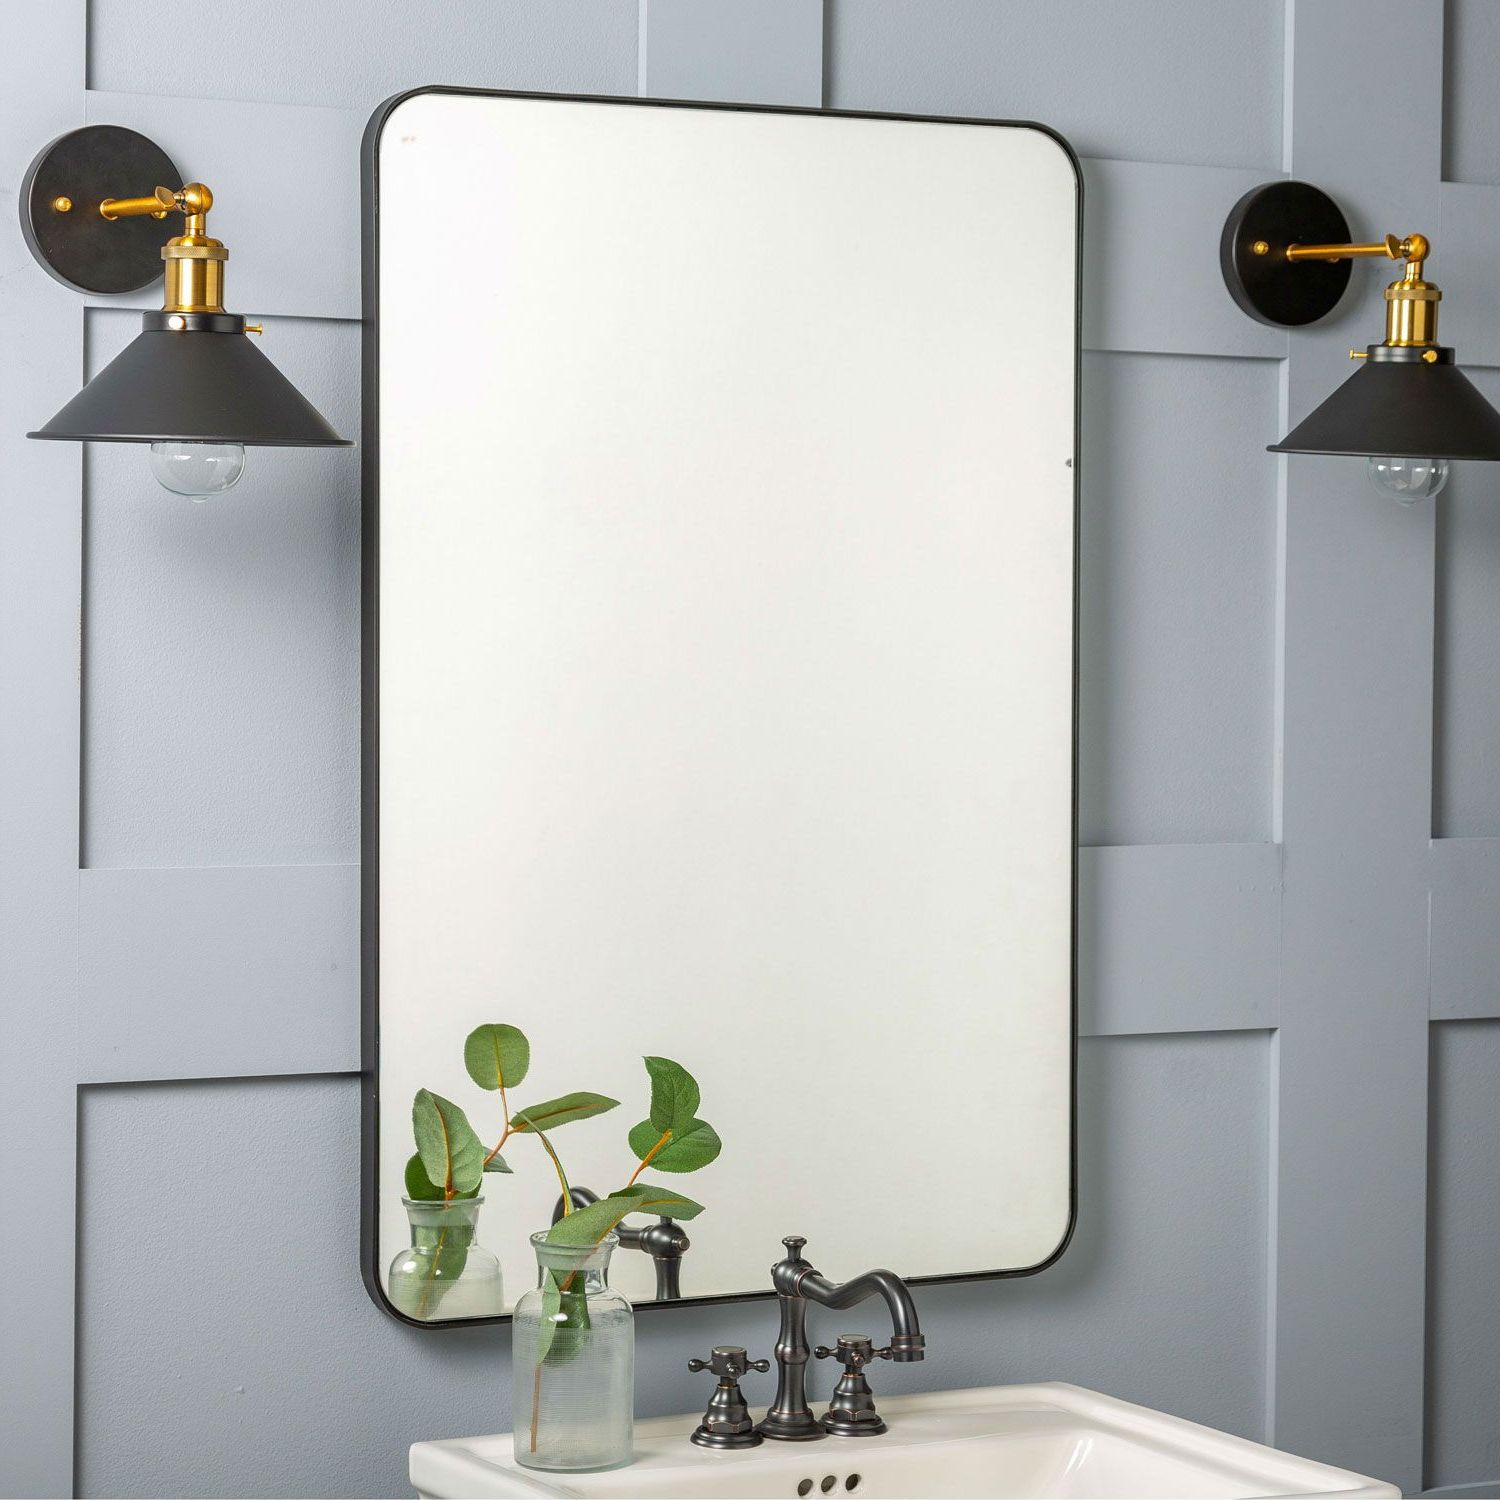 Bellacor Intended For Matte Black Metal Rectangular Wall Mirrors (View 10 of 15)